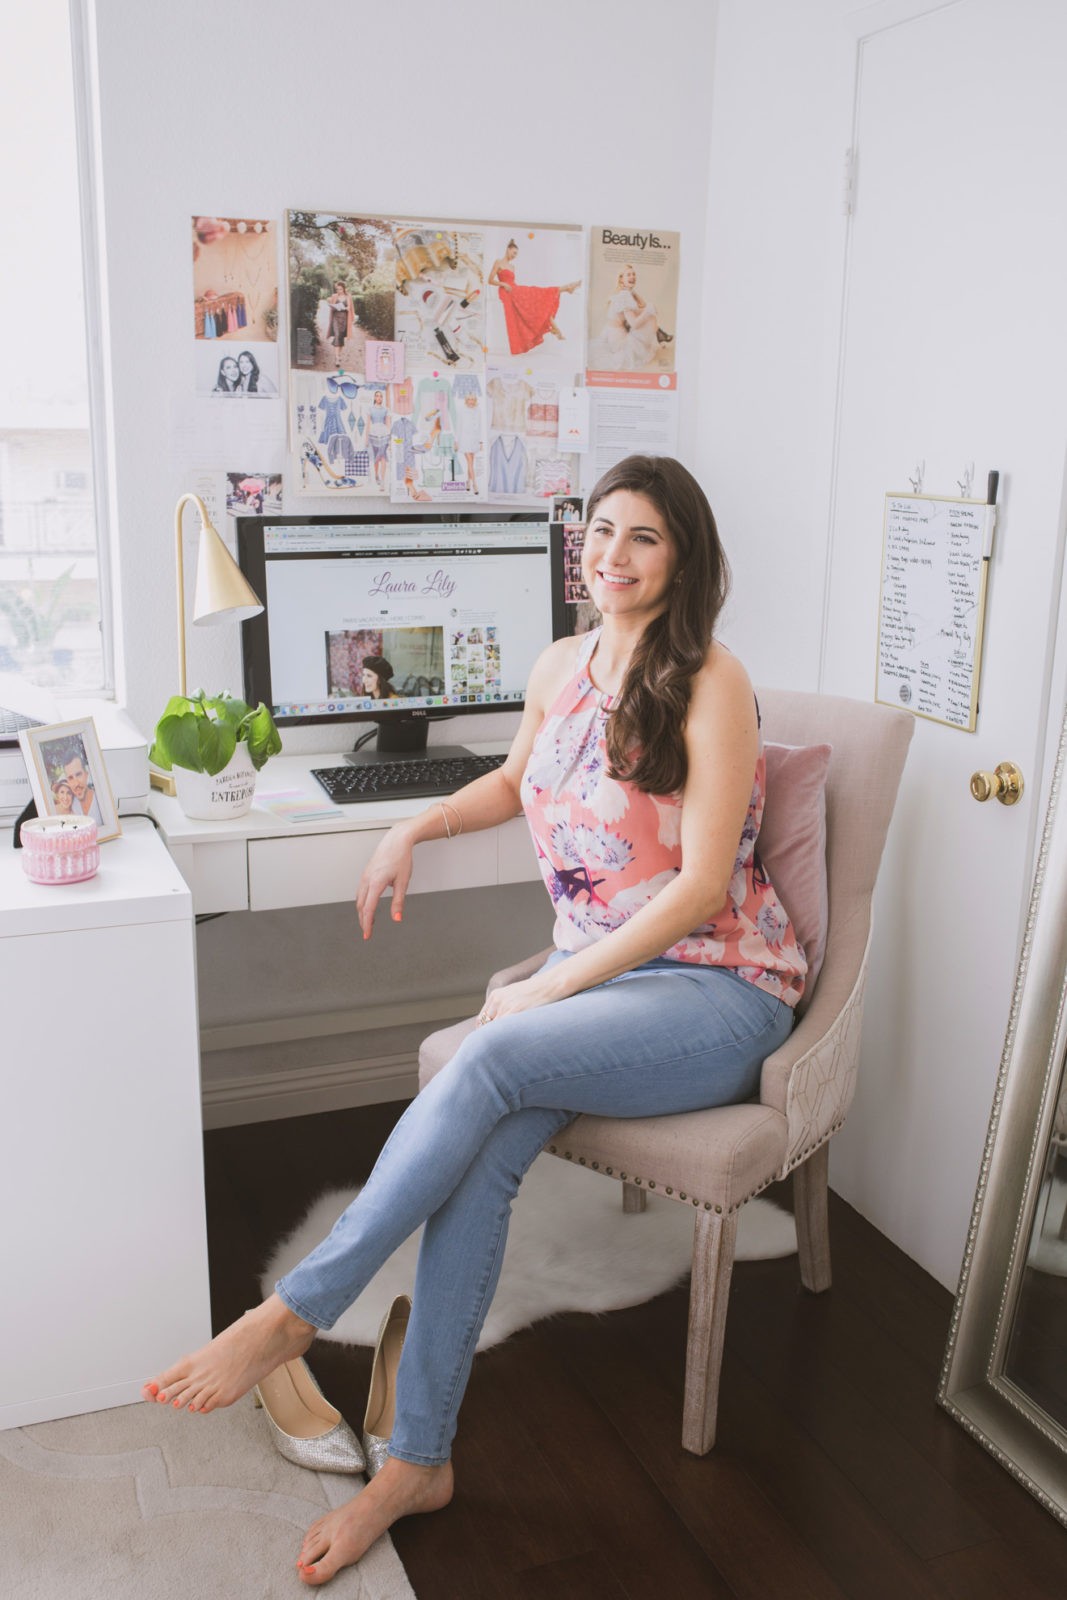 Working From Home Tips by Lifestyle blogger and Influencer Laura Lily